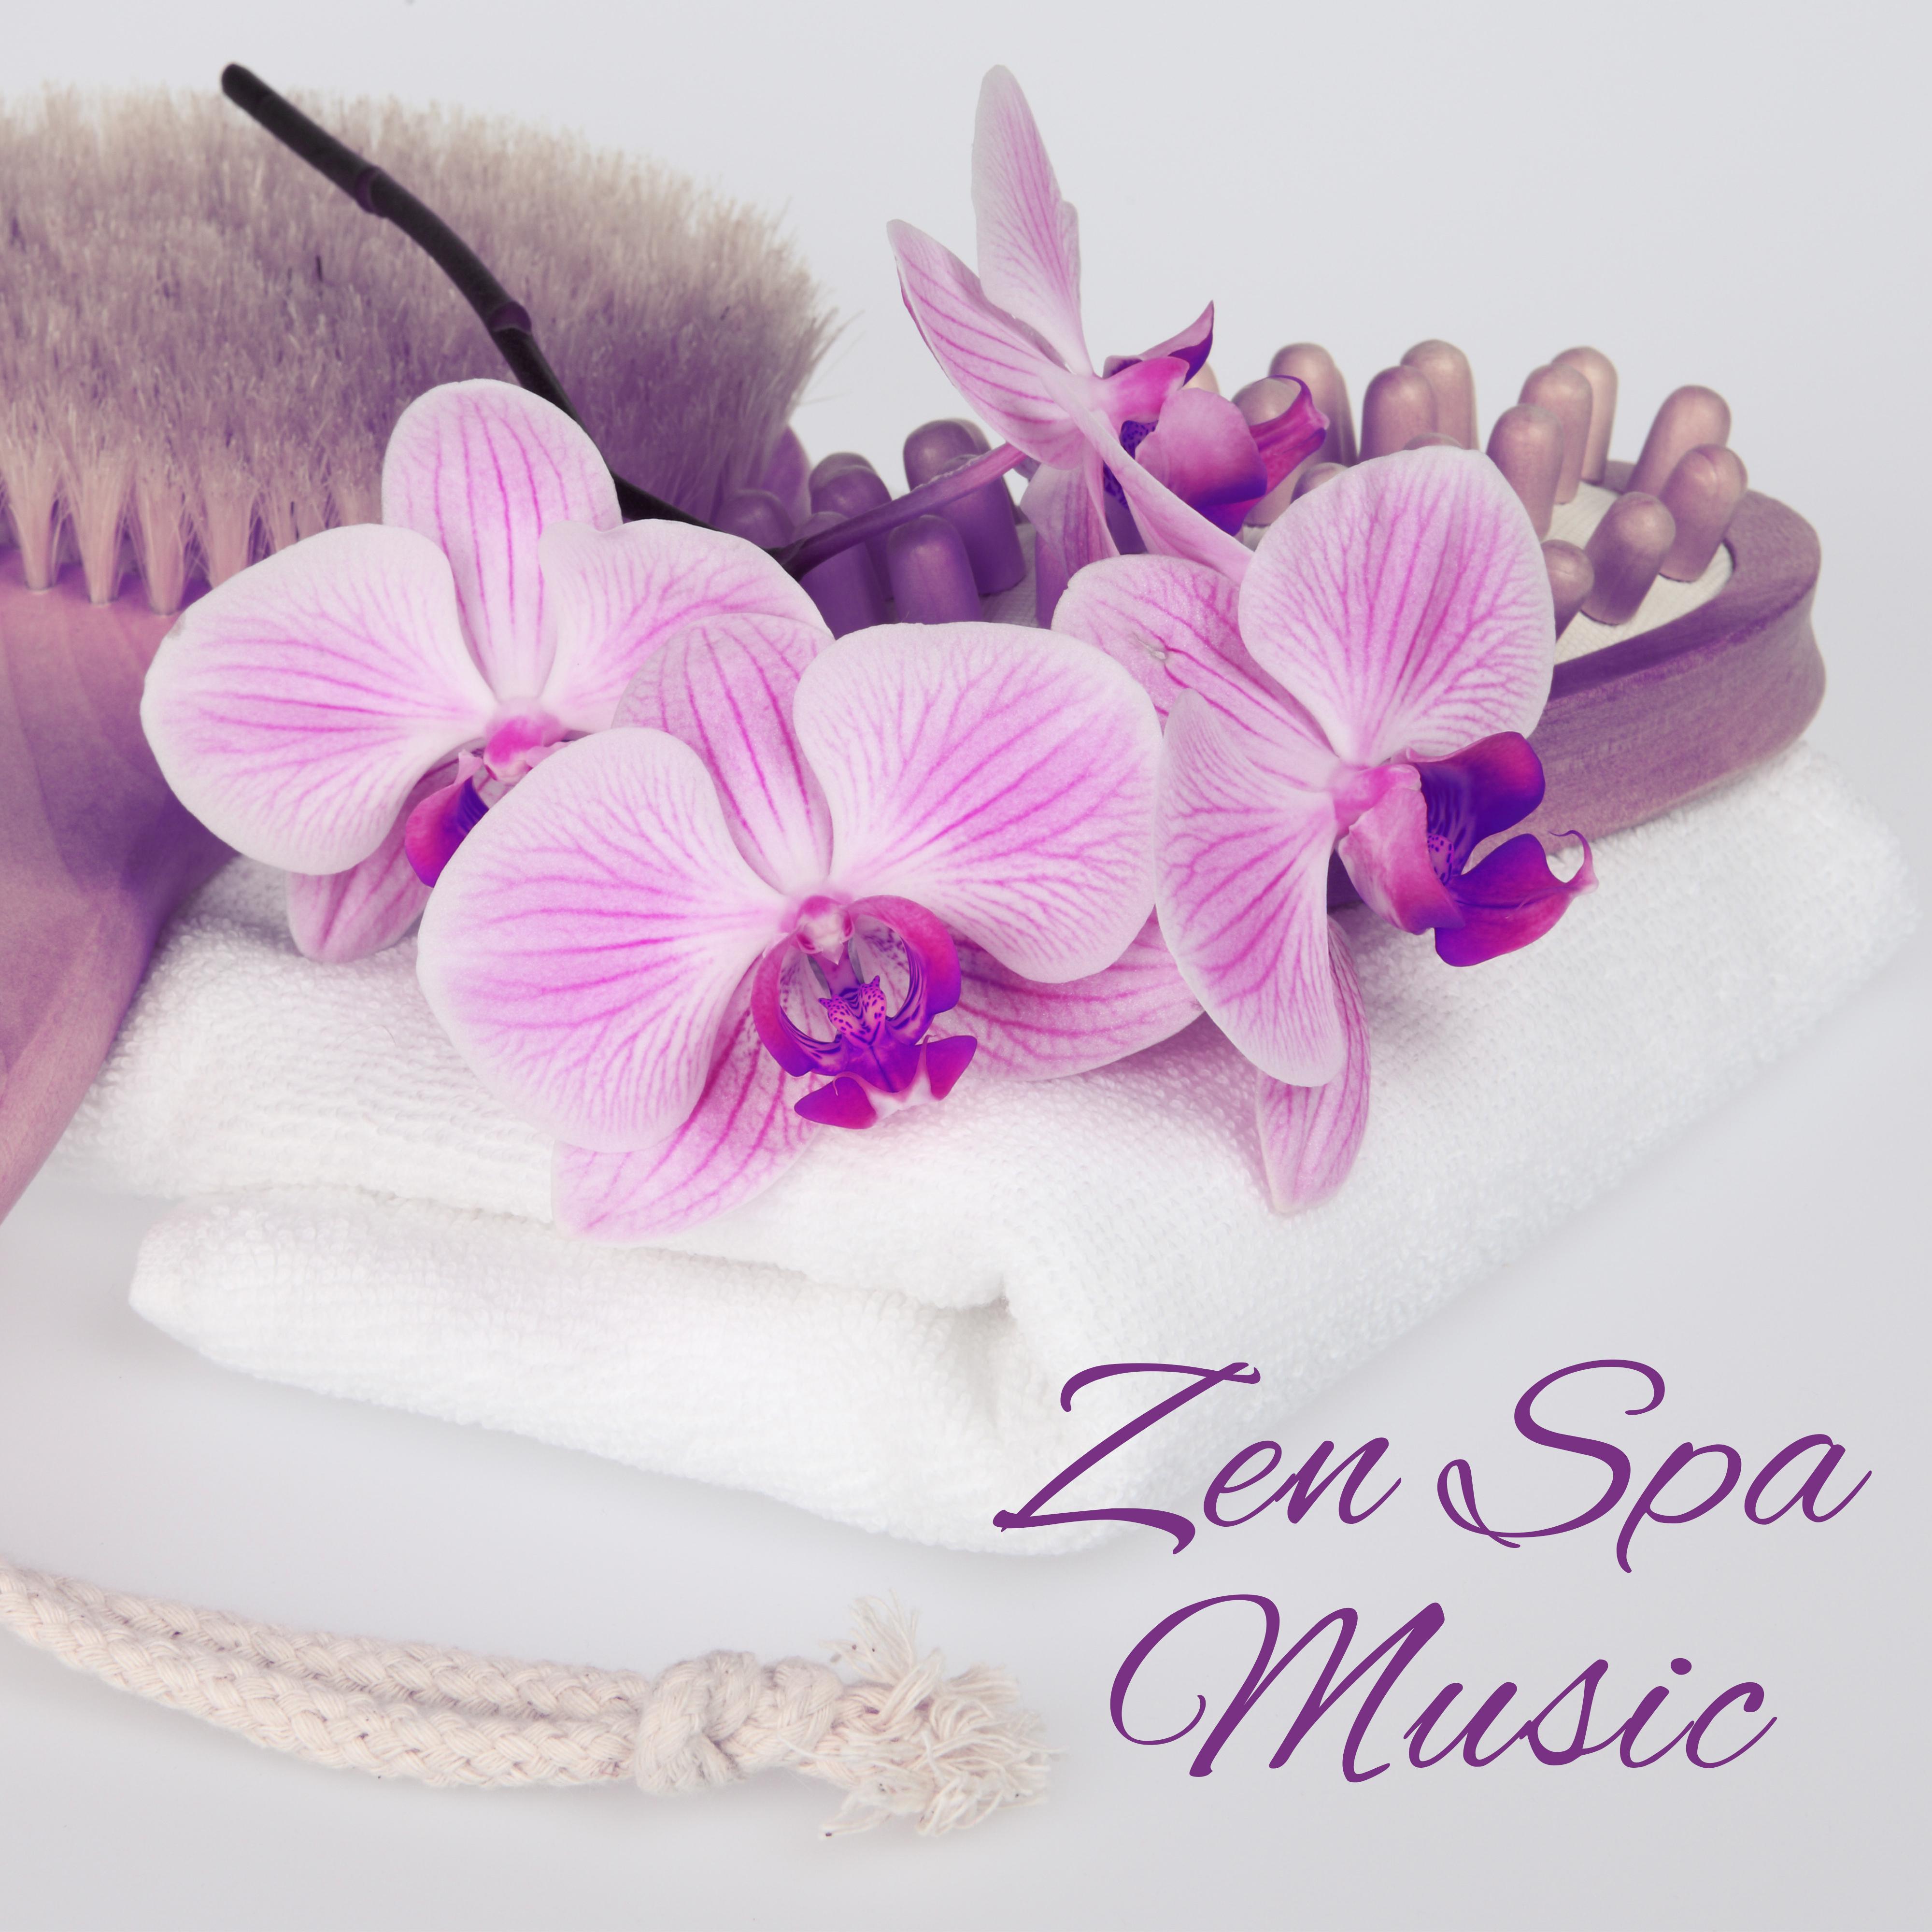 Zen Spa Music – Peaceful Sounds for Deep Relief, Relaxation Wellness, Healing Body, Deep Massage, Nature Sounds, Relaxing Therapy for Pure Mind, Spa Music